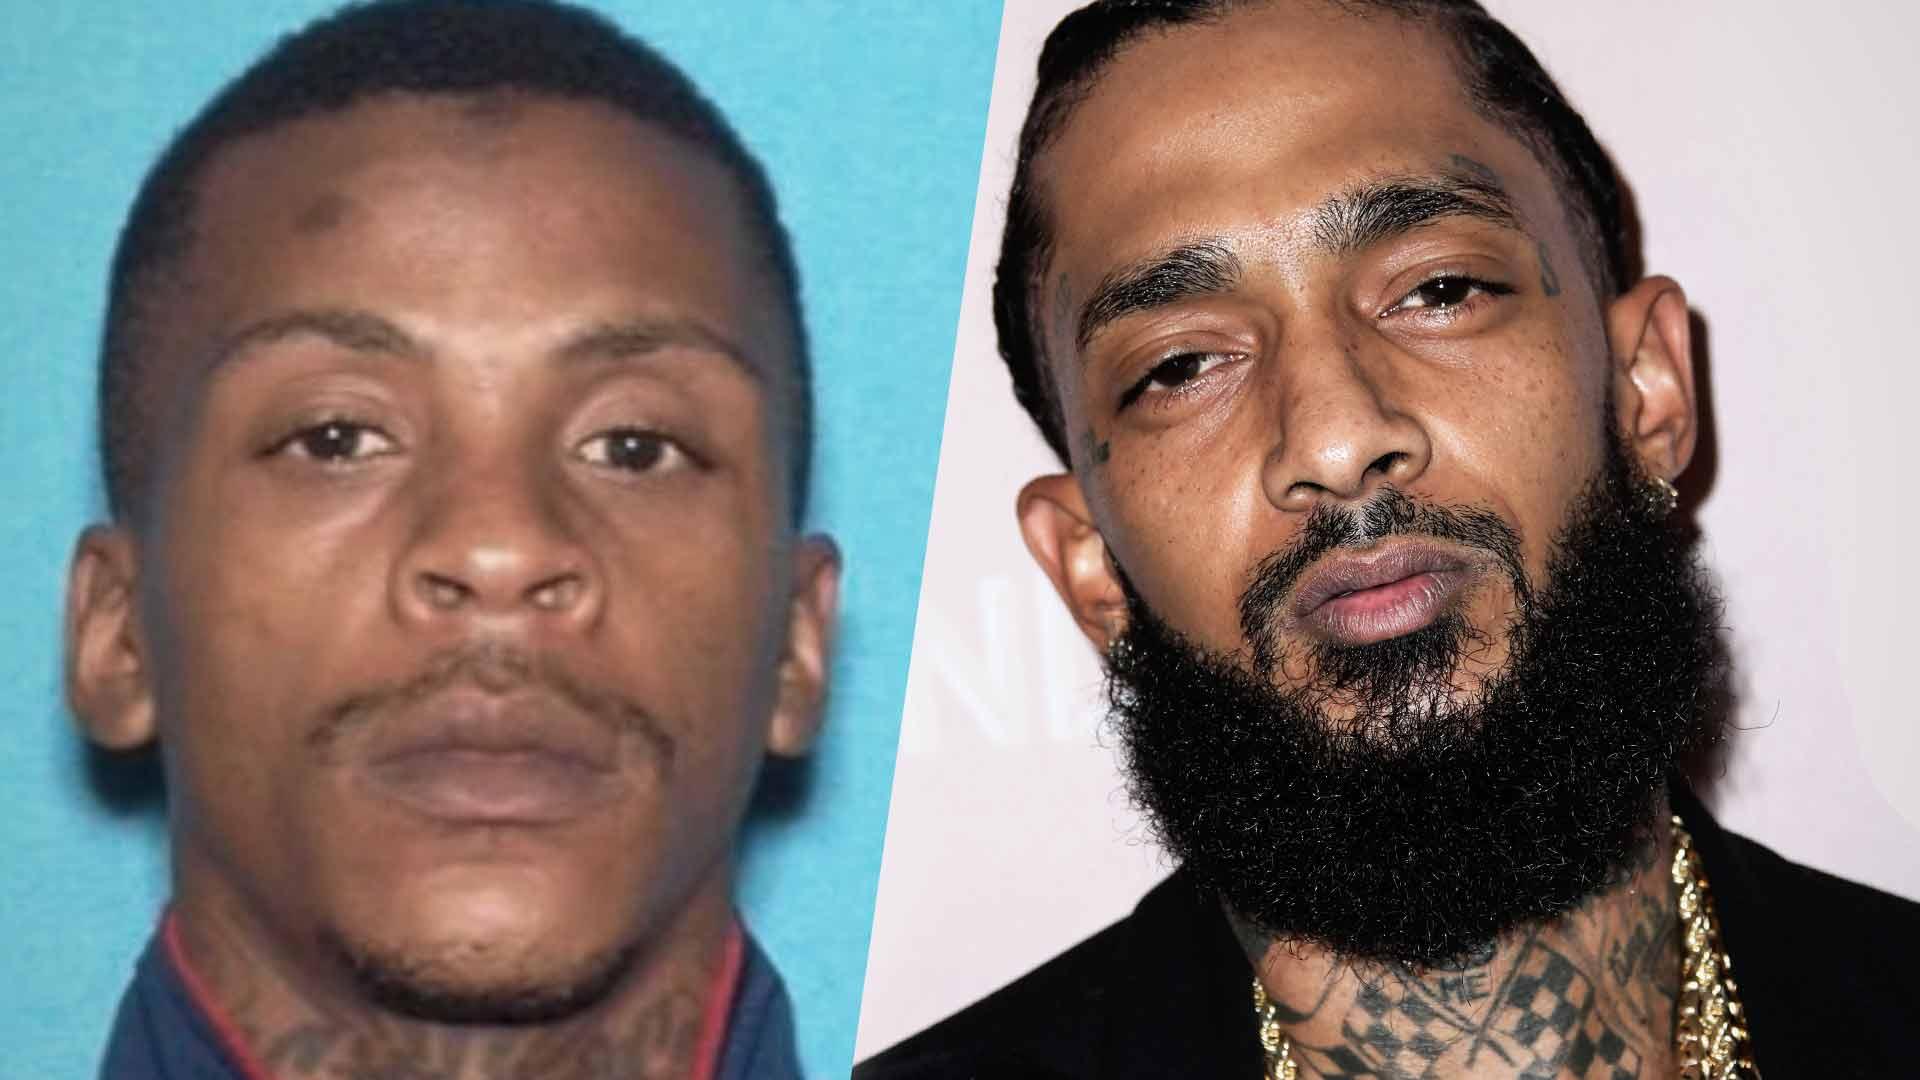 Nipsey Hussle Suspected Killer Has History of Gun Charges, Domestic Violence